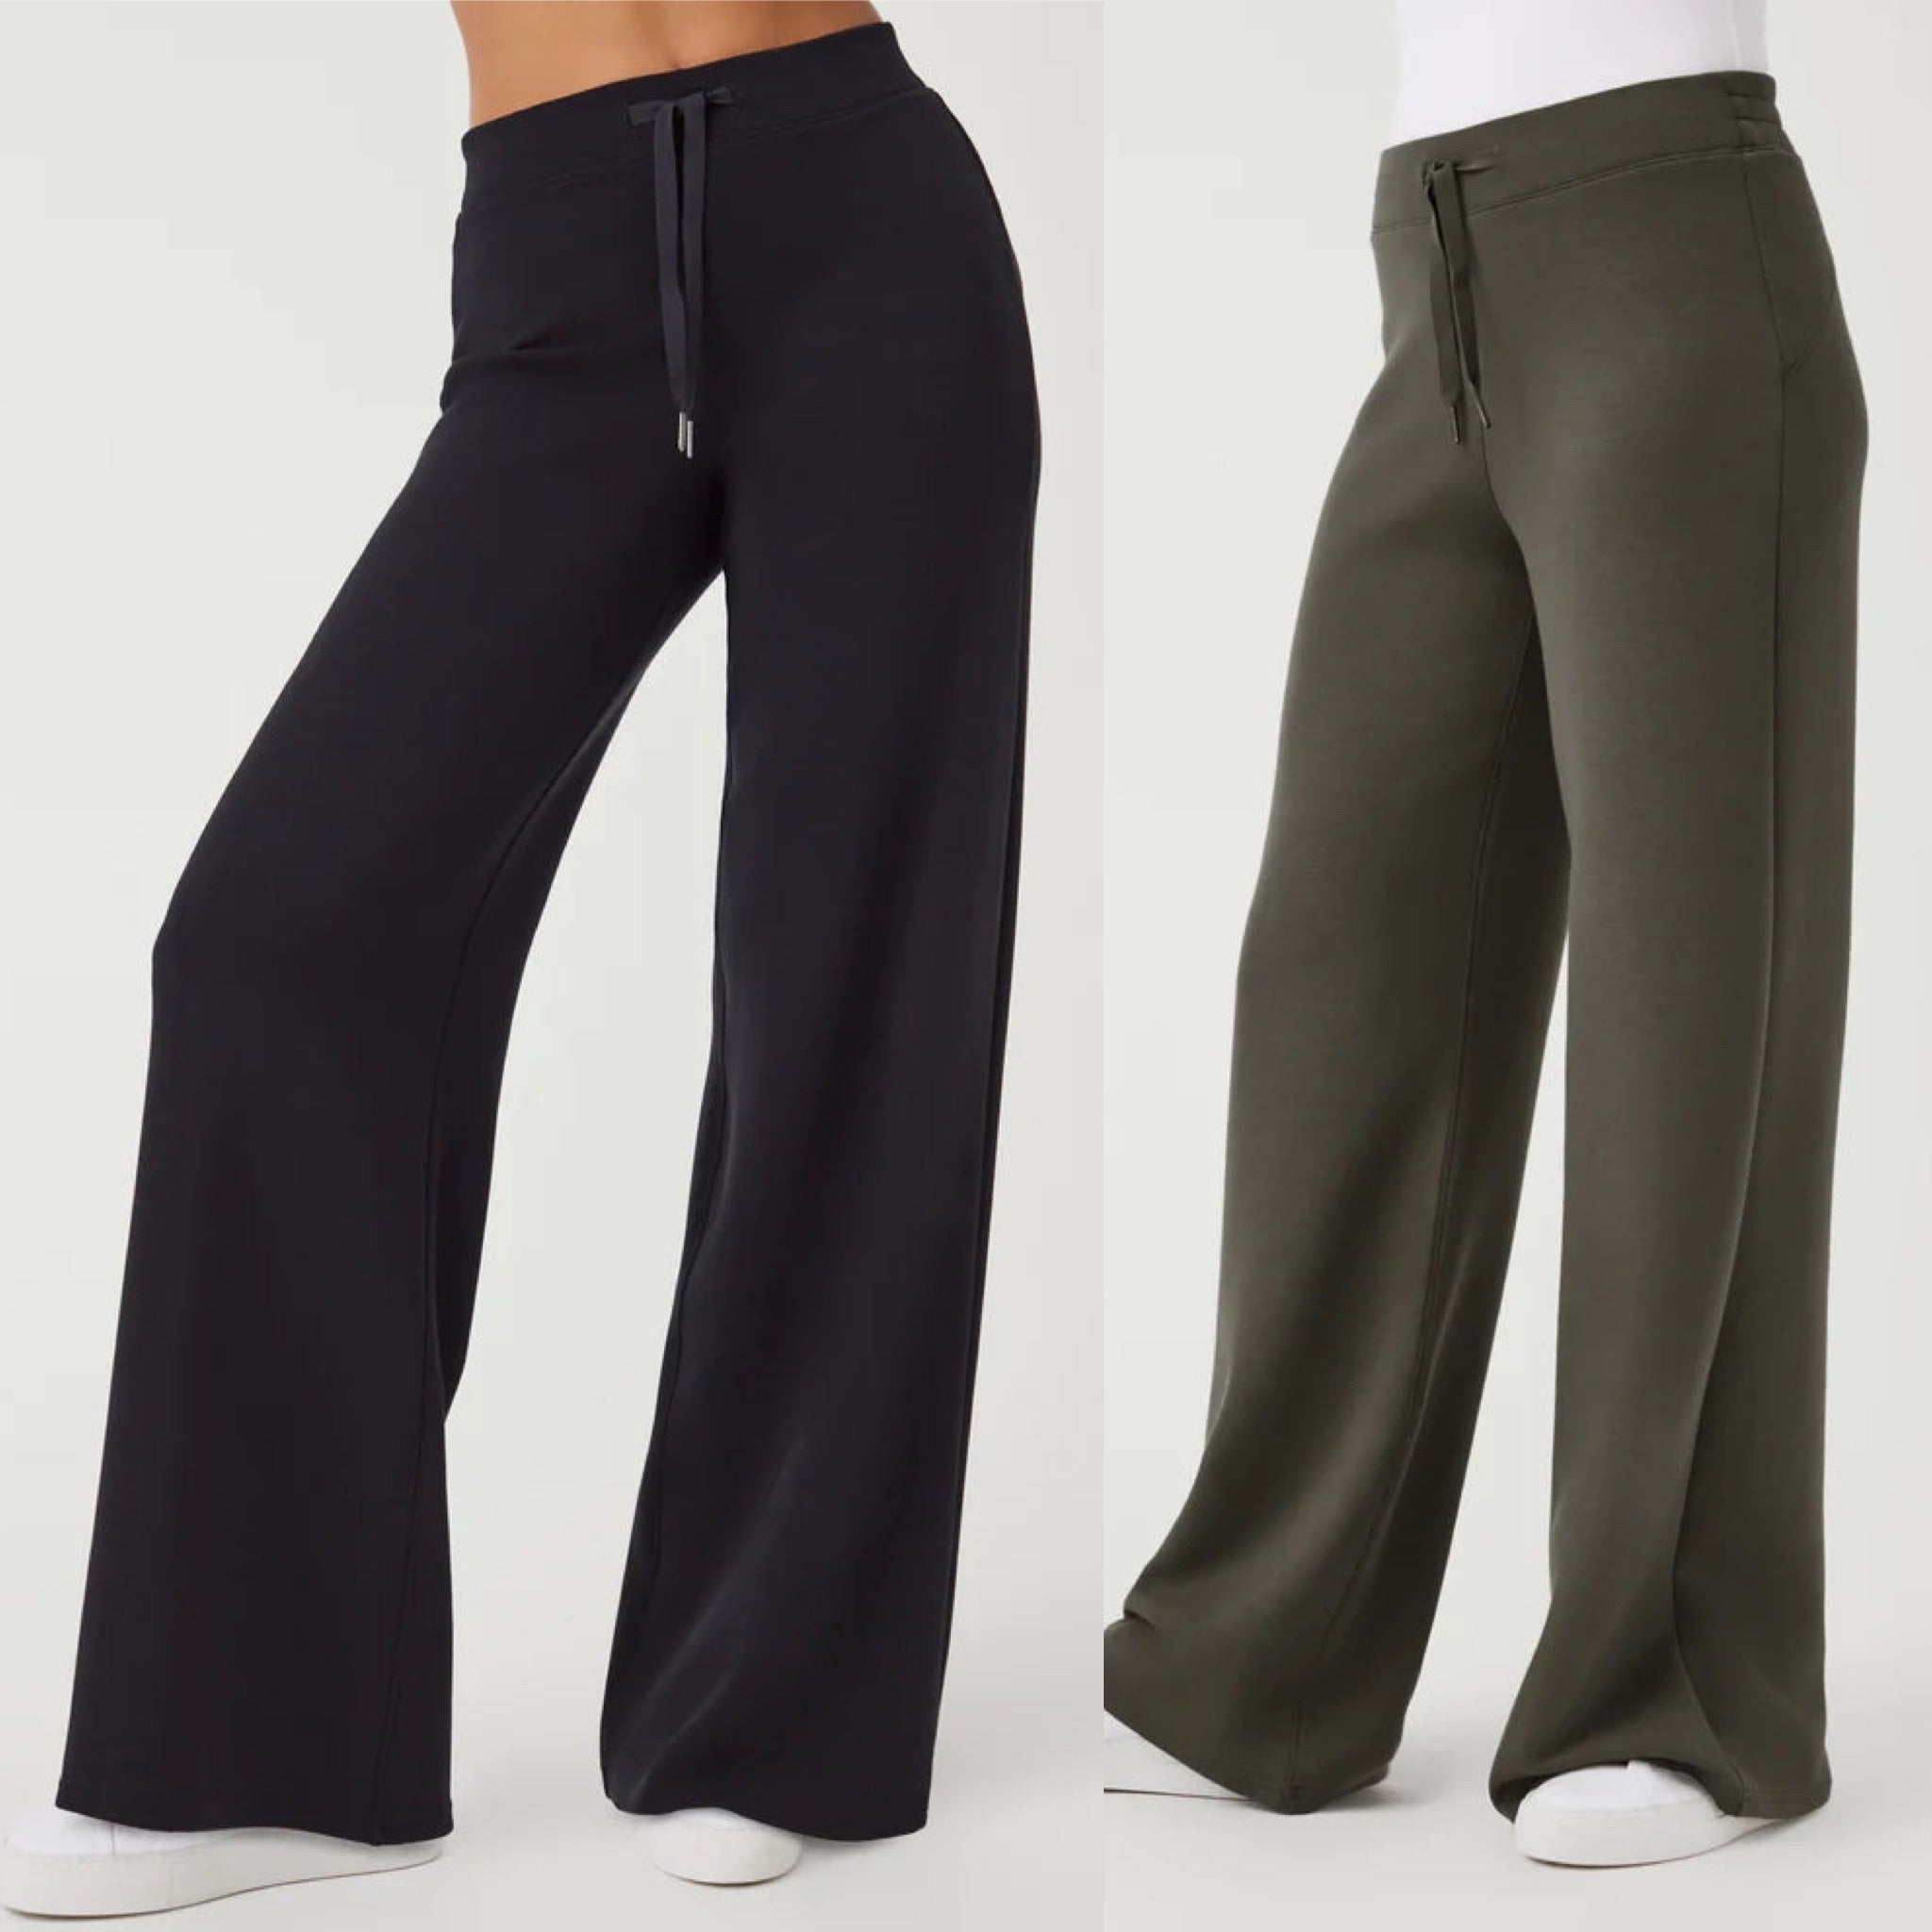 Spanx Airessentials wide leg pant